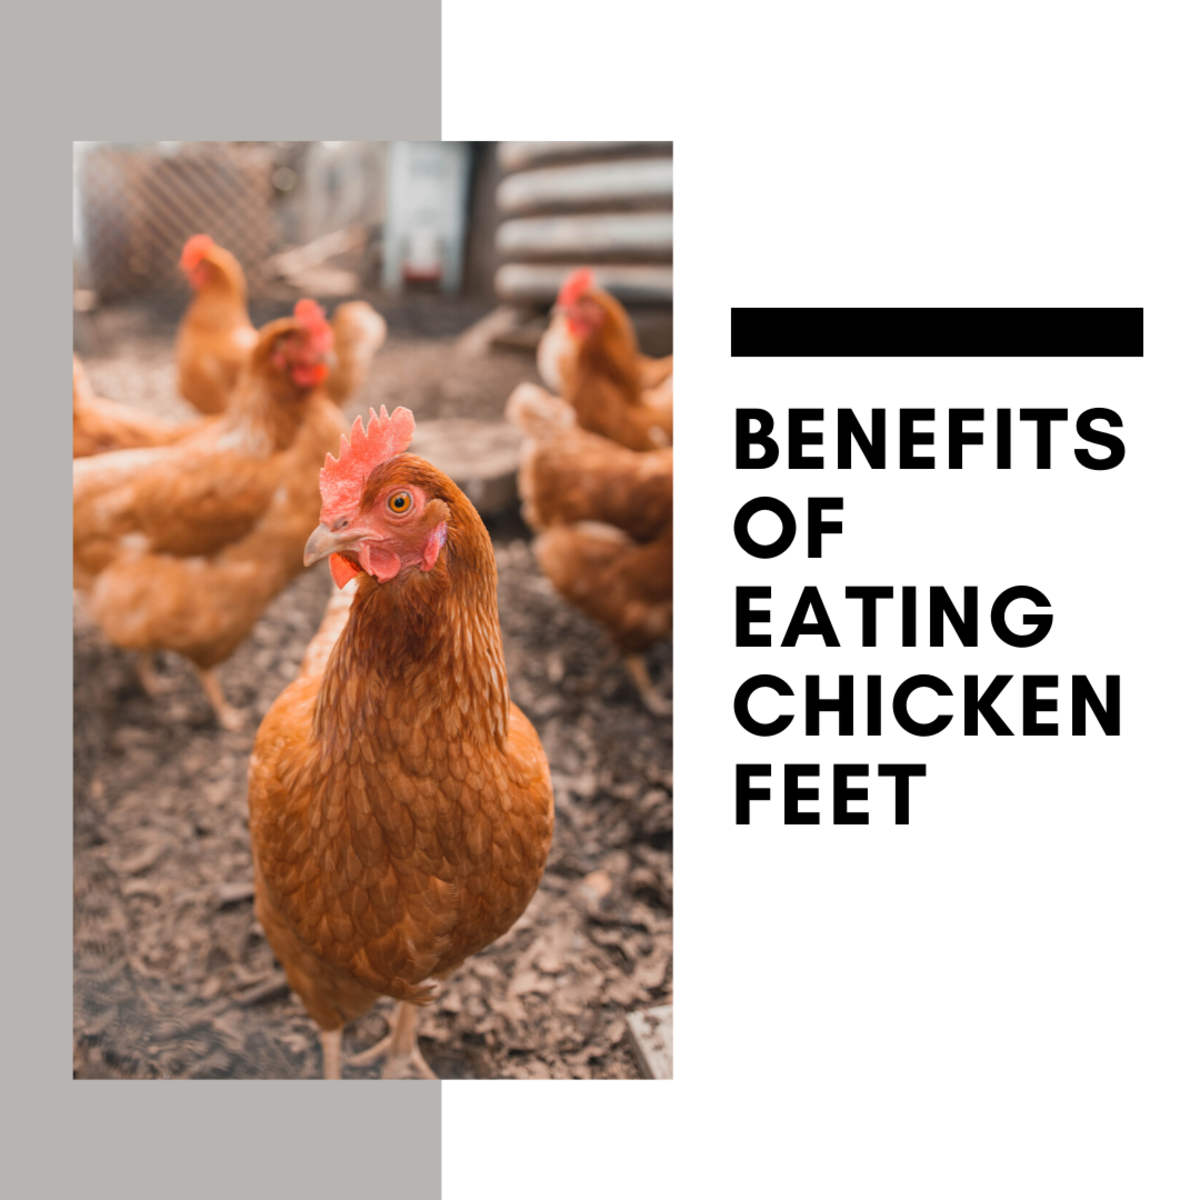 Chicken feet provide a surprising number of health benefits.